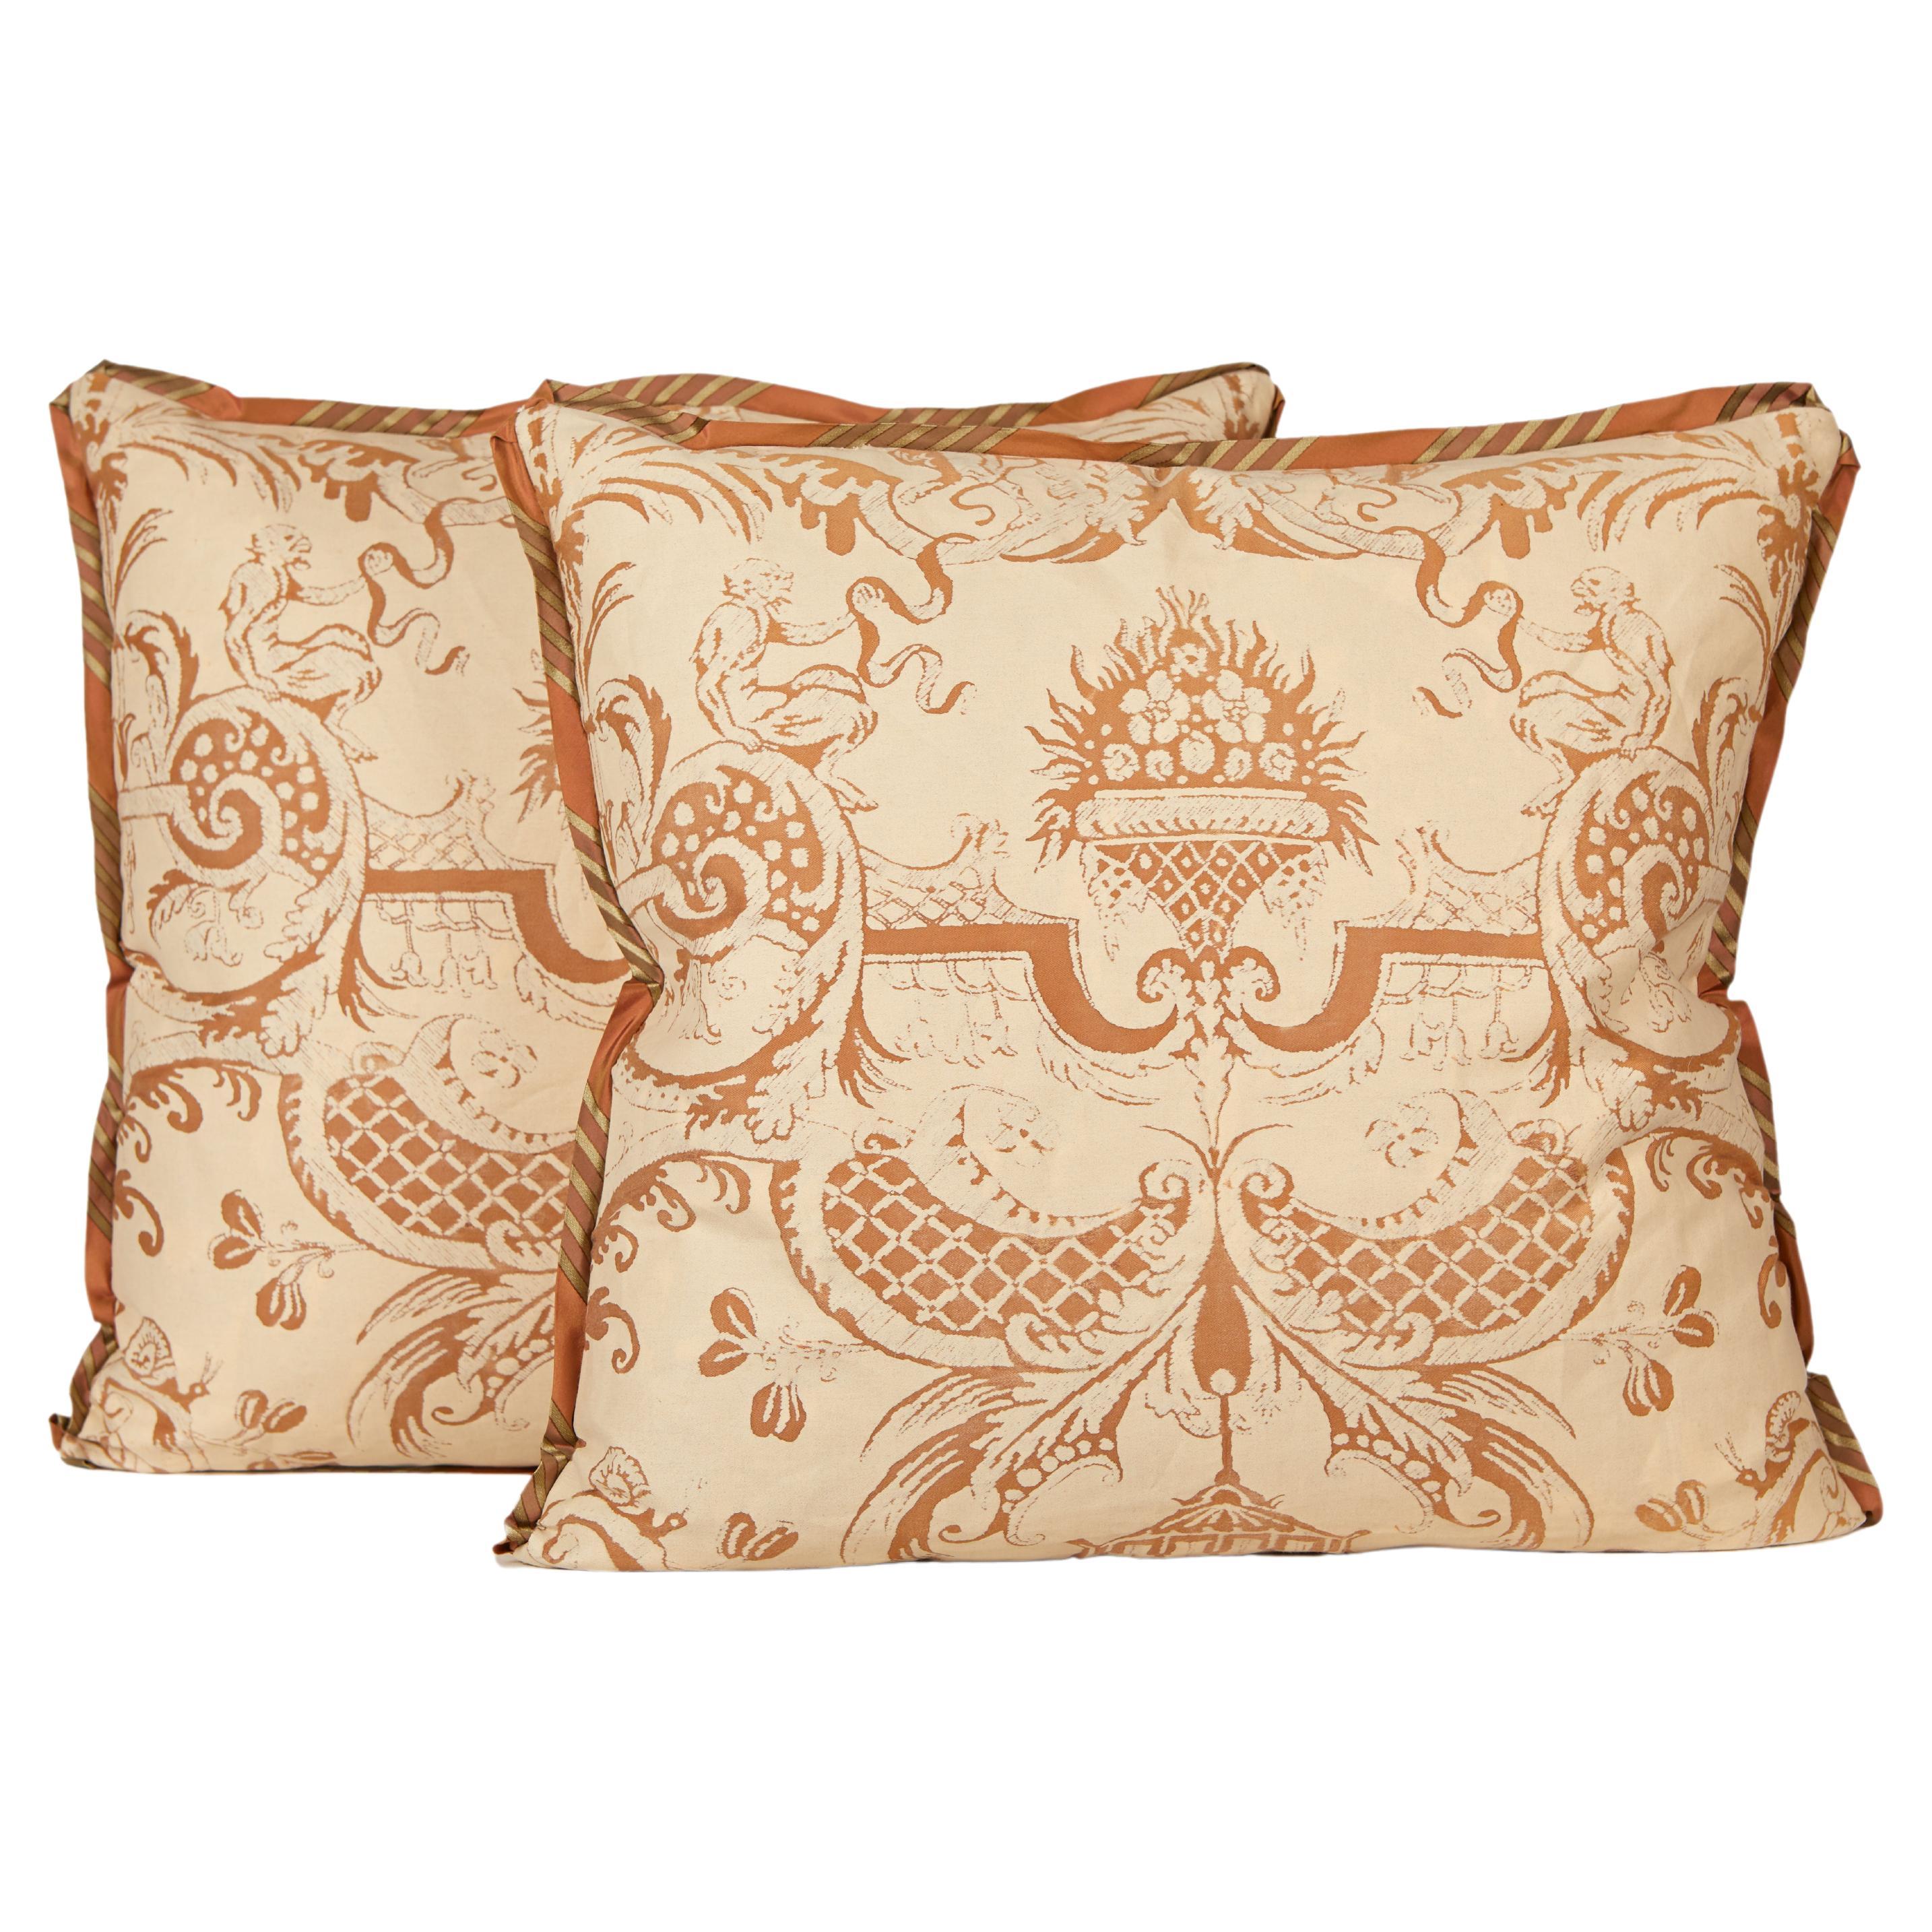 Pair of Fortuny Fabric Cushions in the Mazzarino Print in Tan and Rust